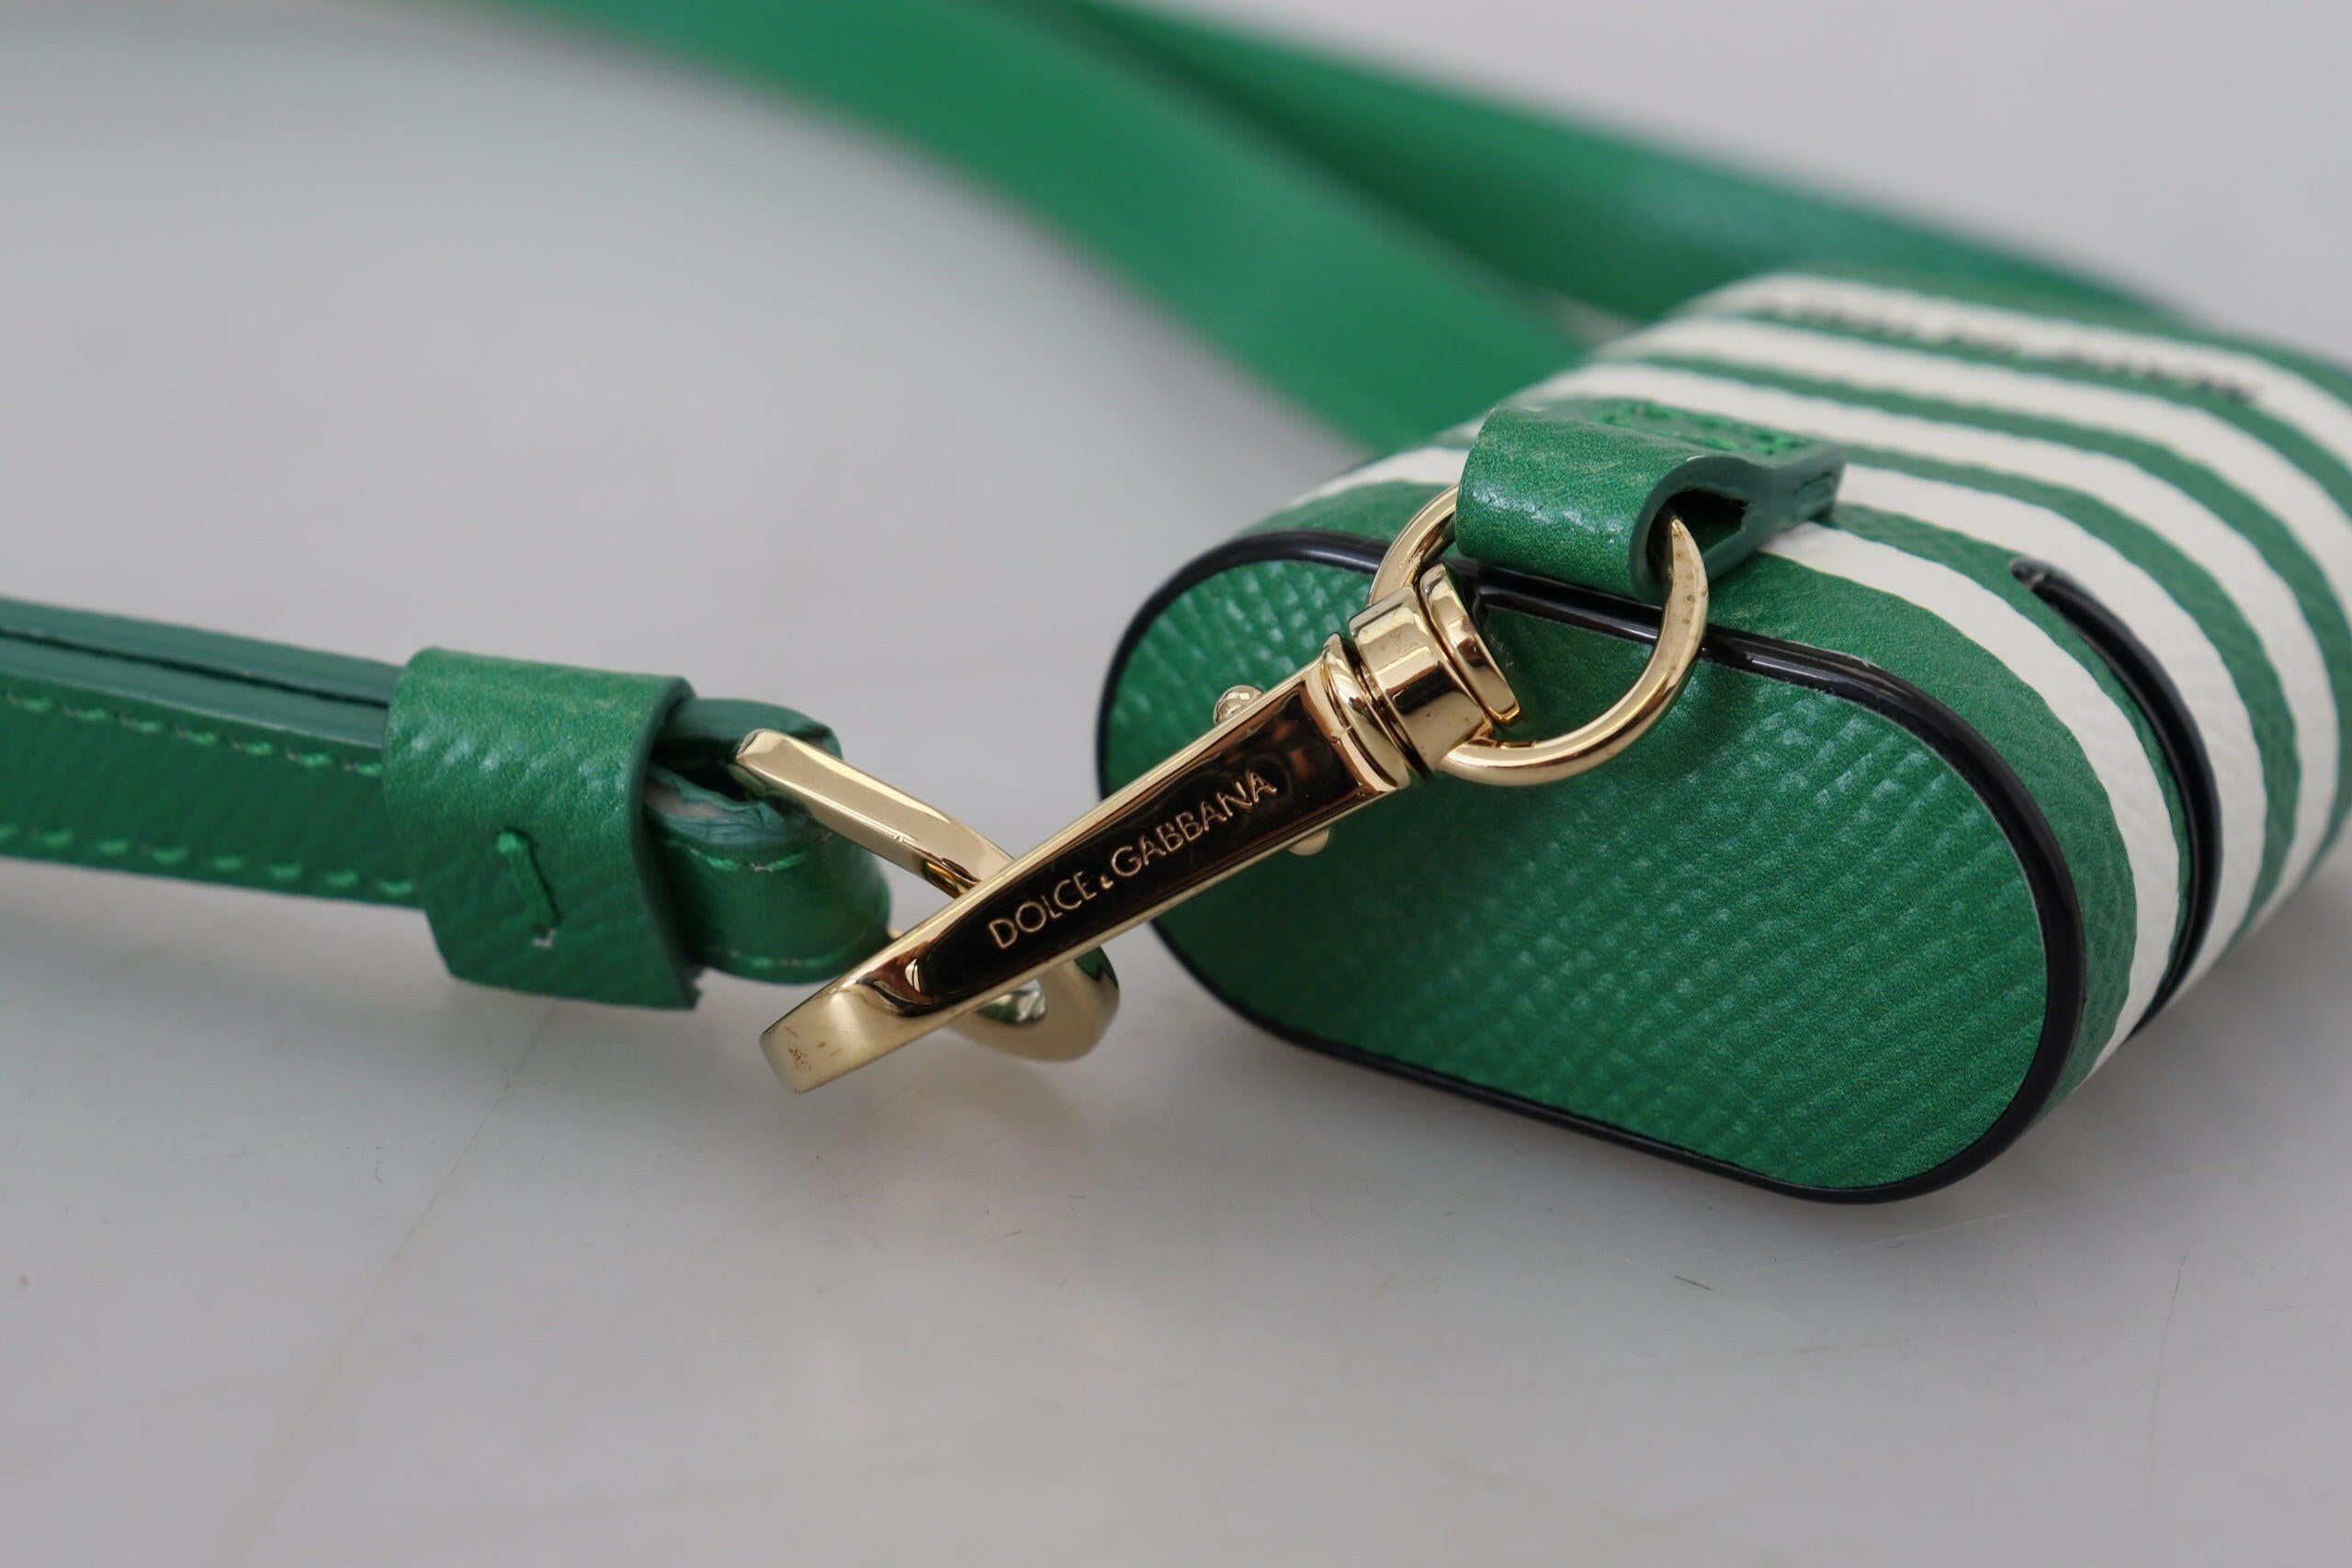 Dolce & Gabbana Green Leather Strap Gold Metal Logo Airpods Case - GENUINE AUTHENTIC BRAND LLC  